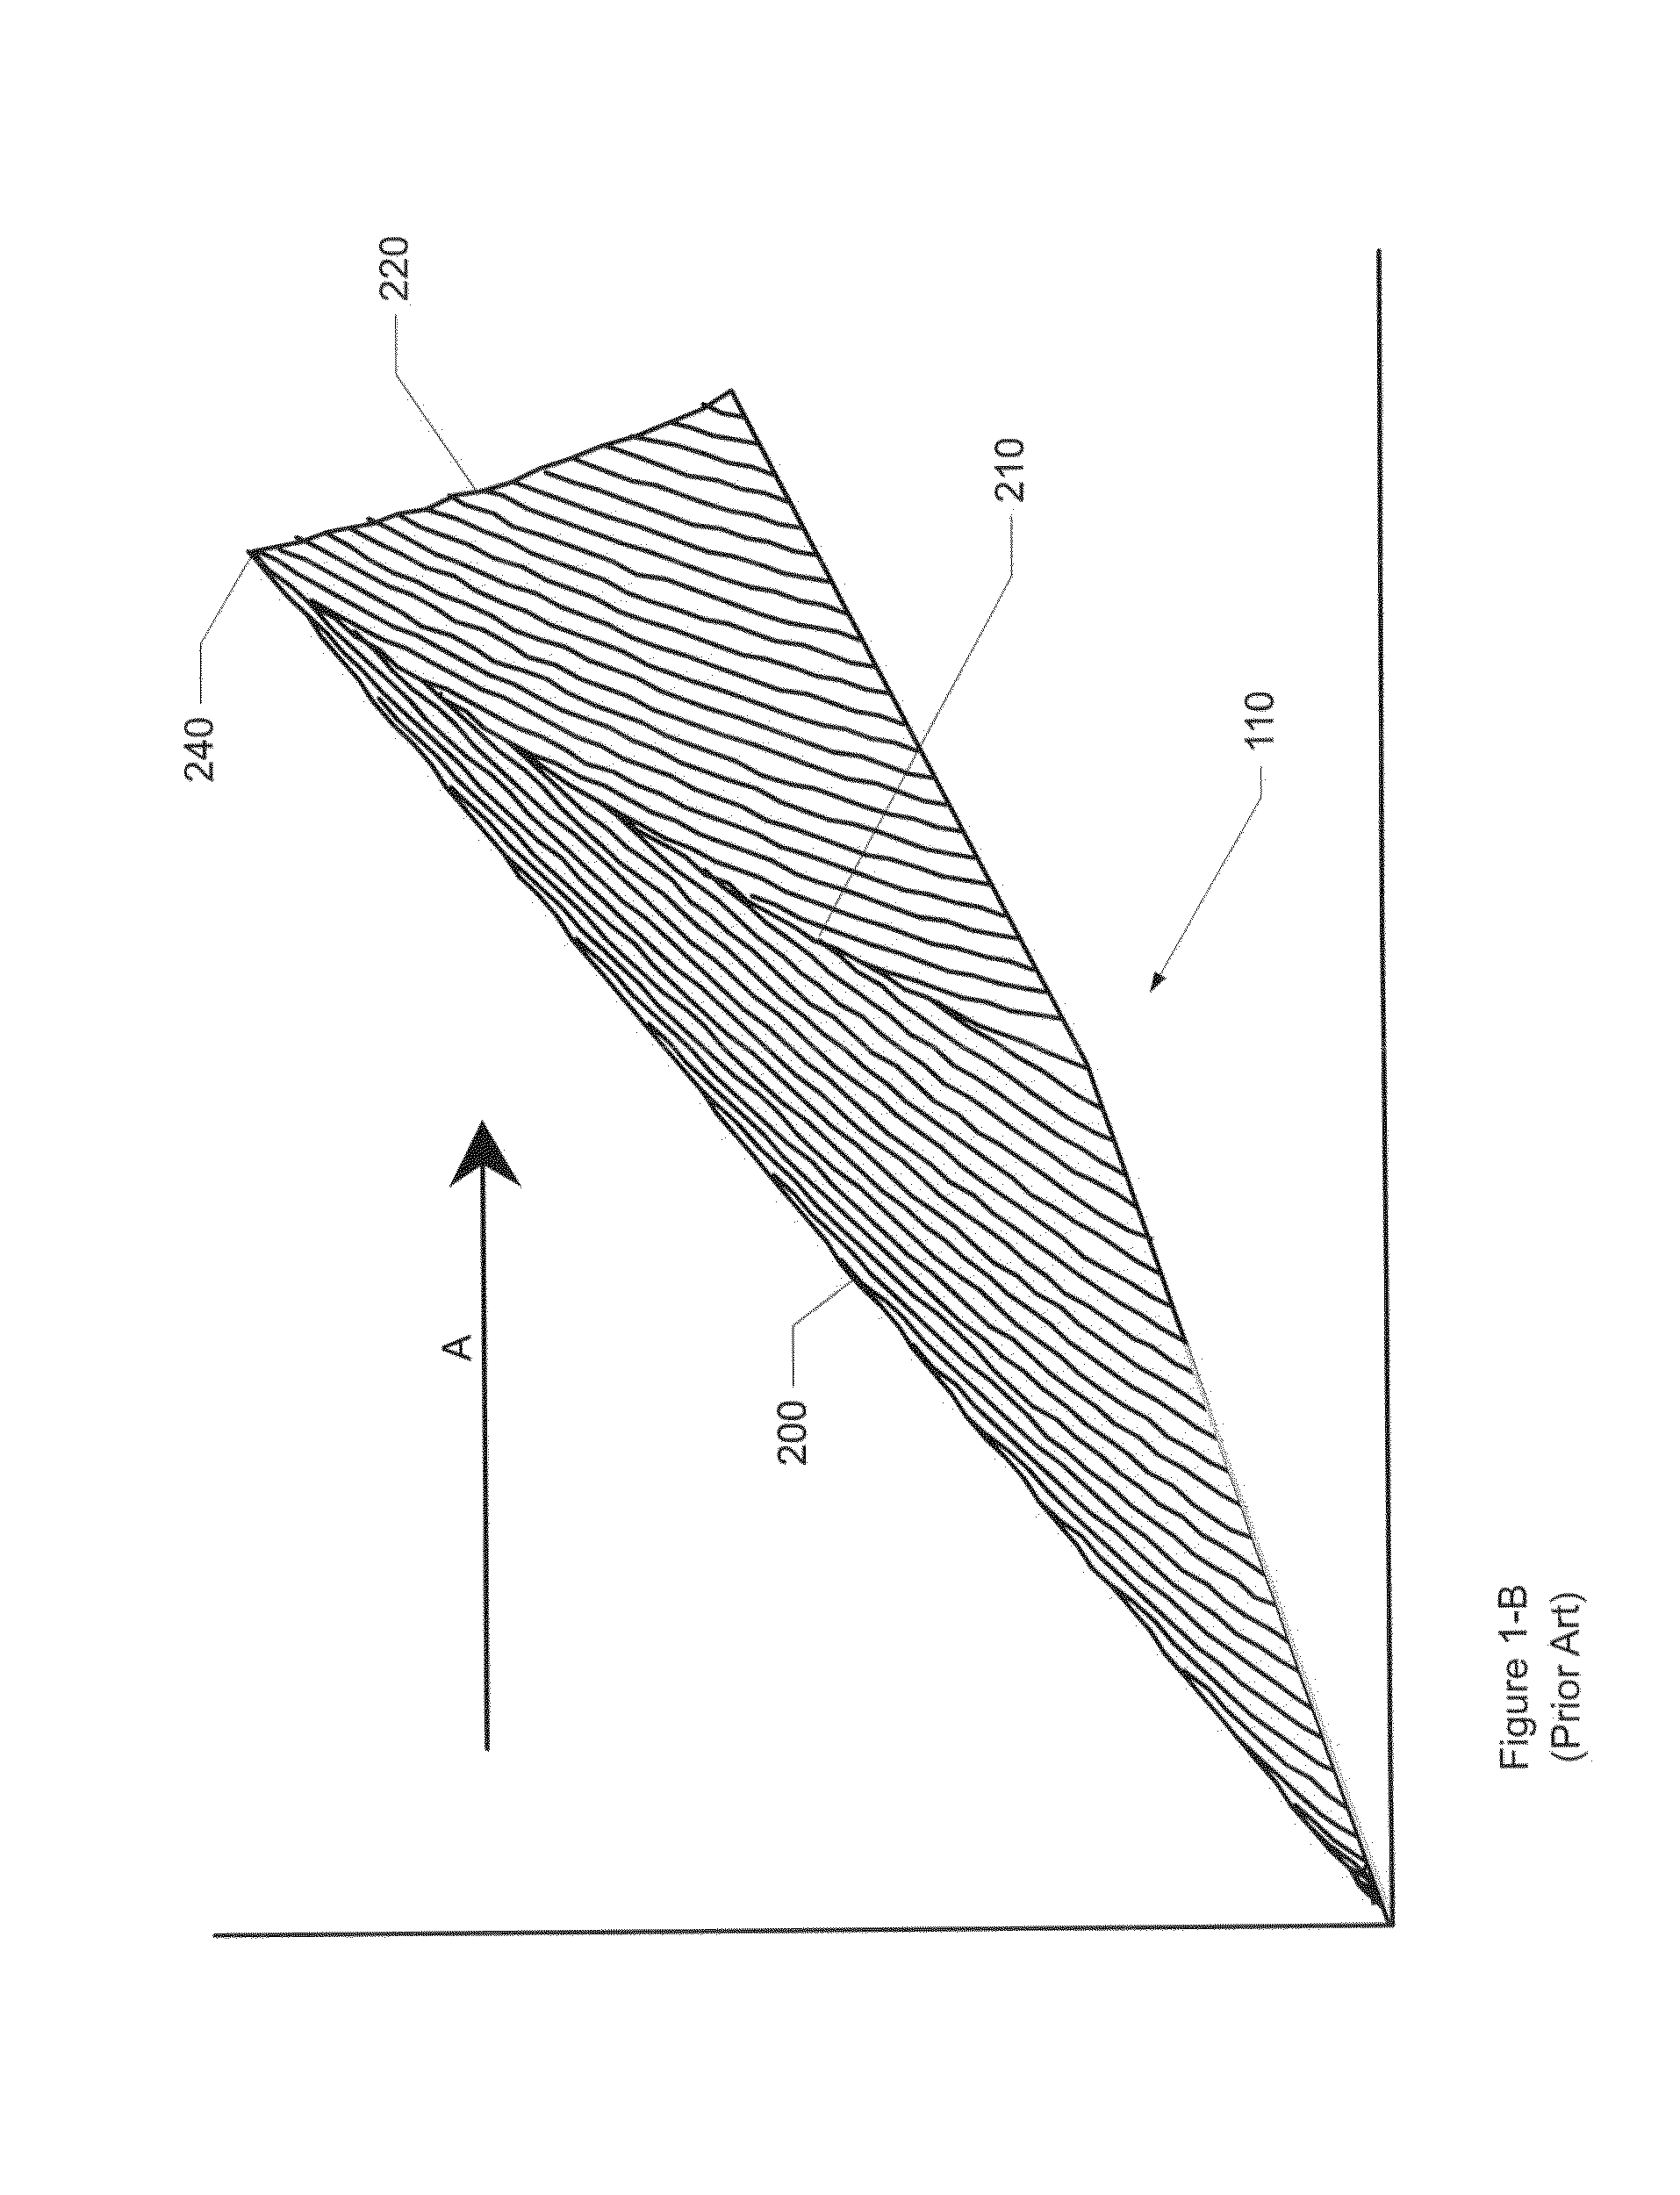 Isentropic compression inlet for supersonic aircraft